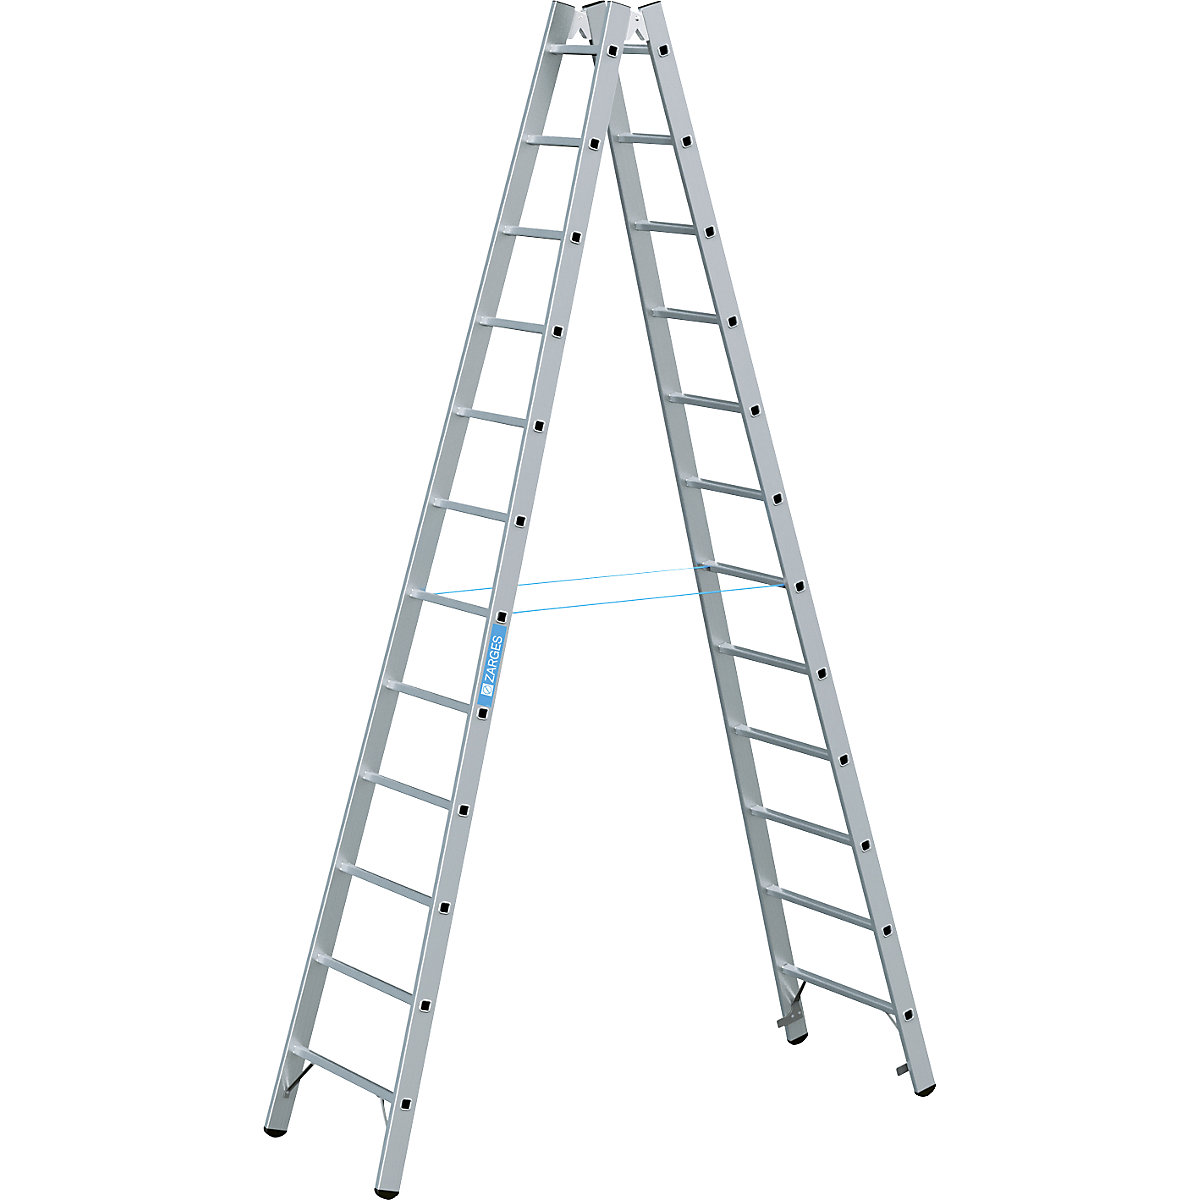 Professional rung ladder – ZARGES, double sided, 2 x 12 rungs-8